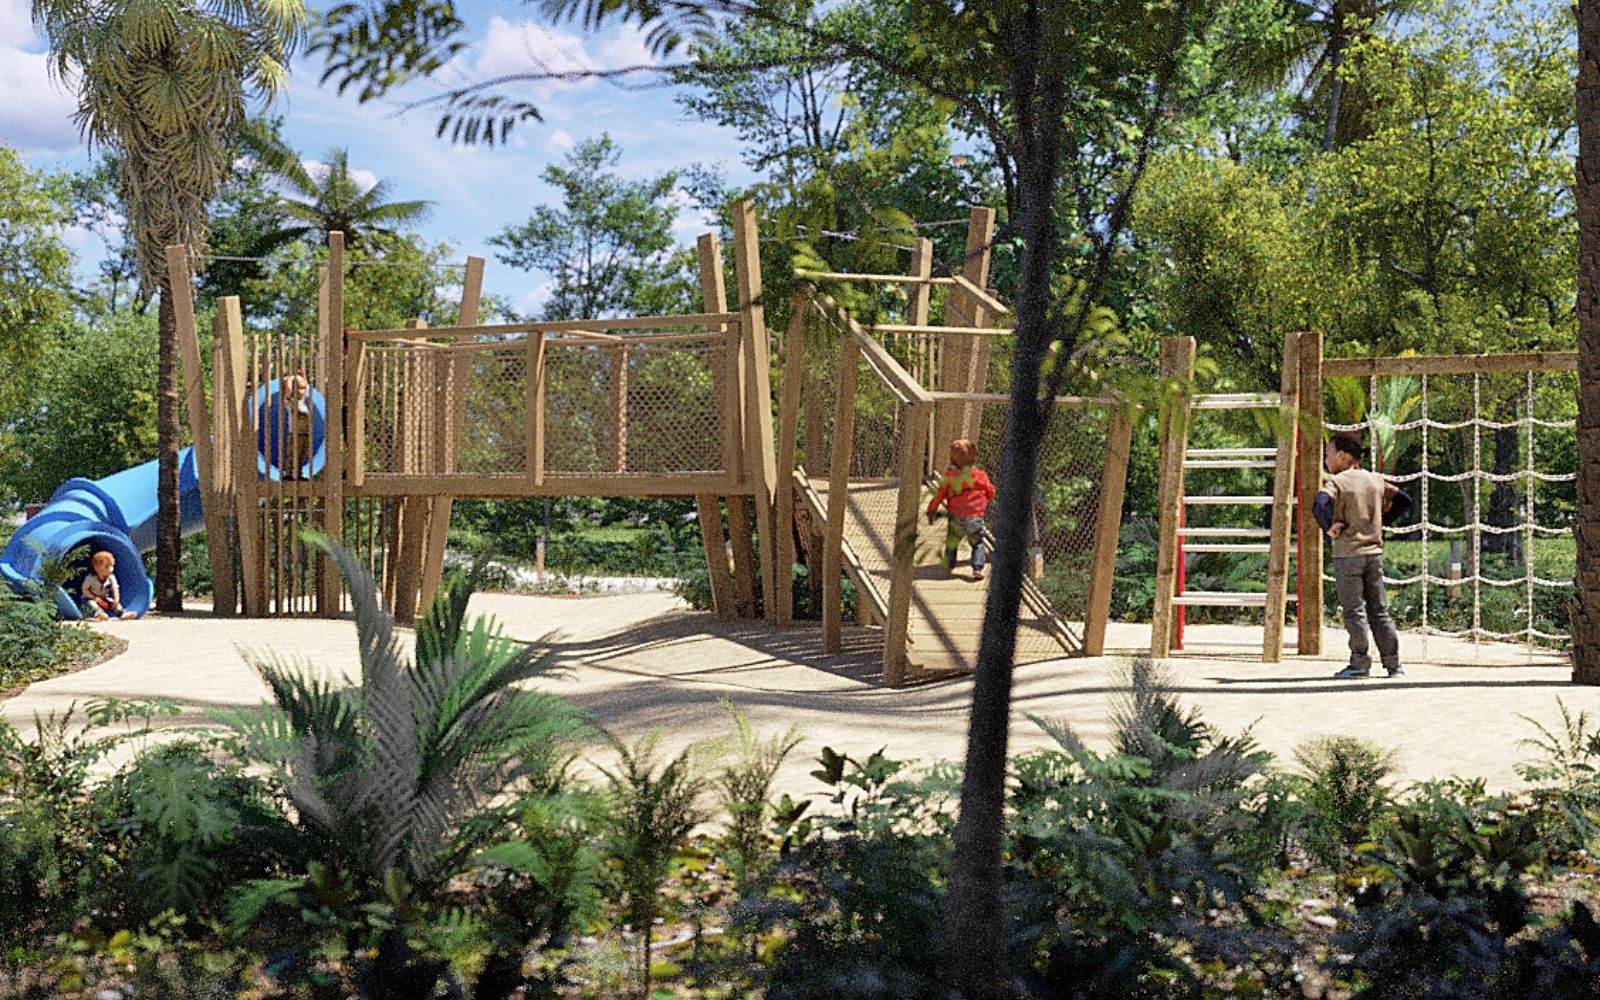 636 m2 lot, in gated community with private cenote, for sale Playa del Carmen.